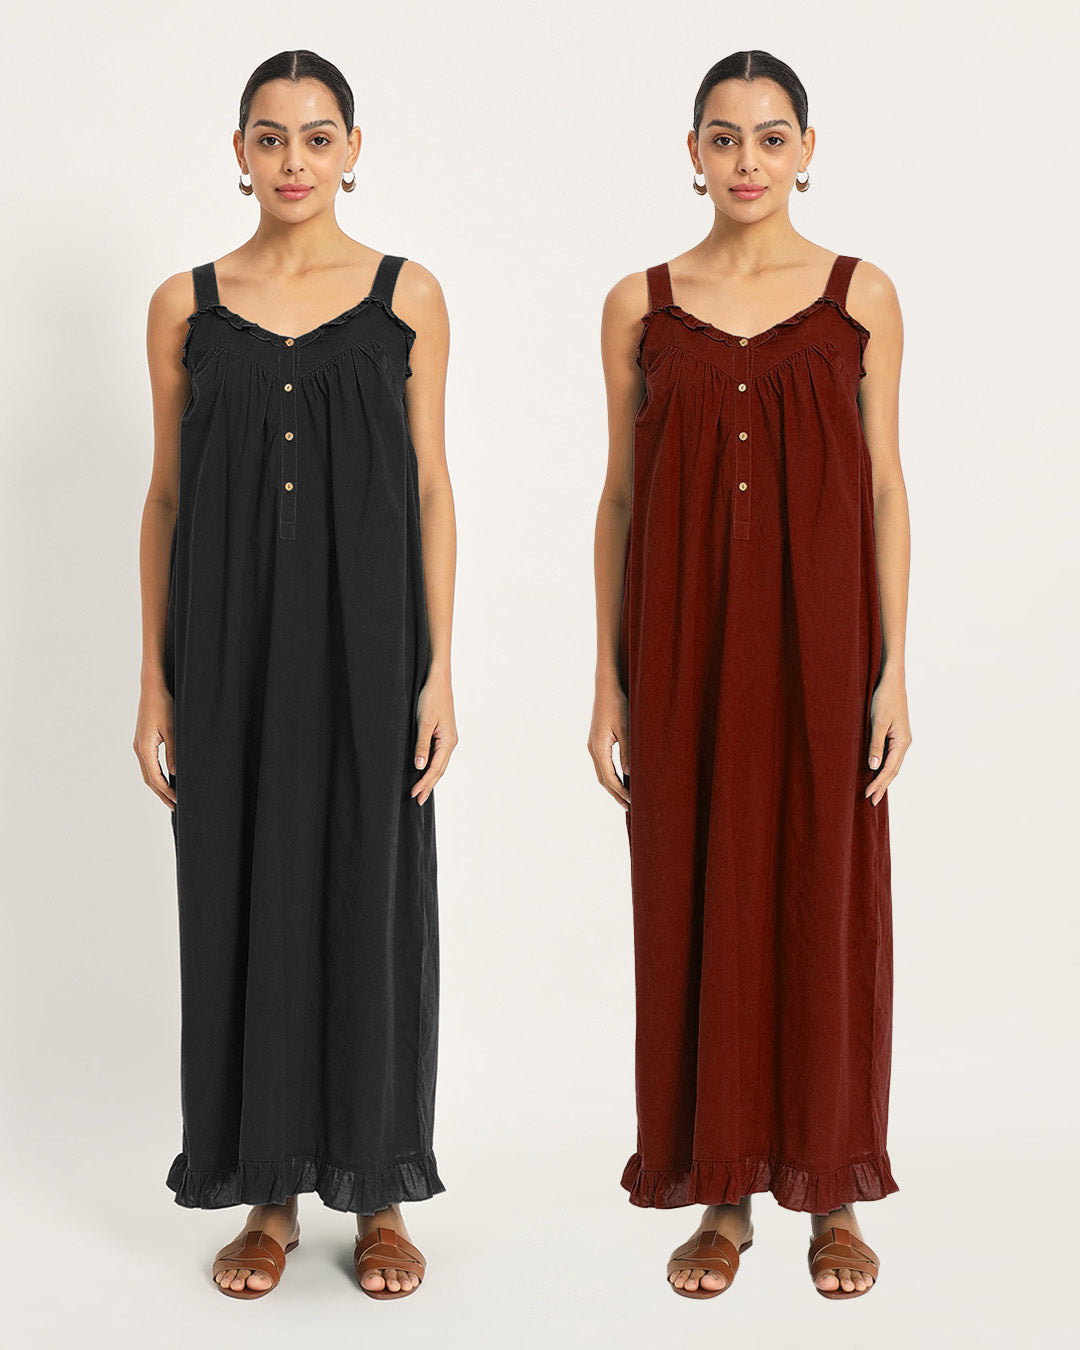 Combo: Black & Russet Red Twilight to Noon Nightdress